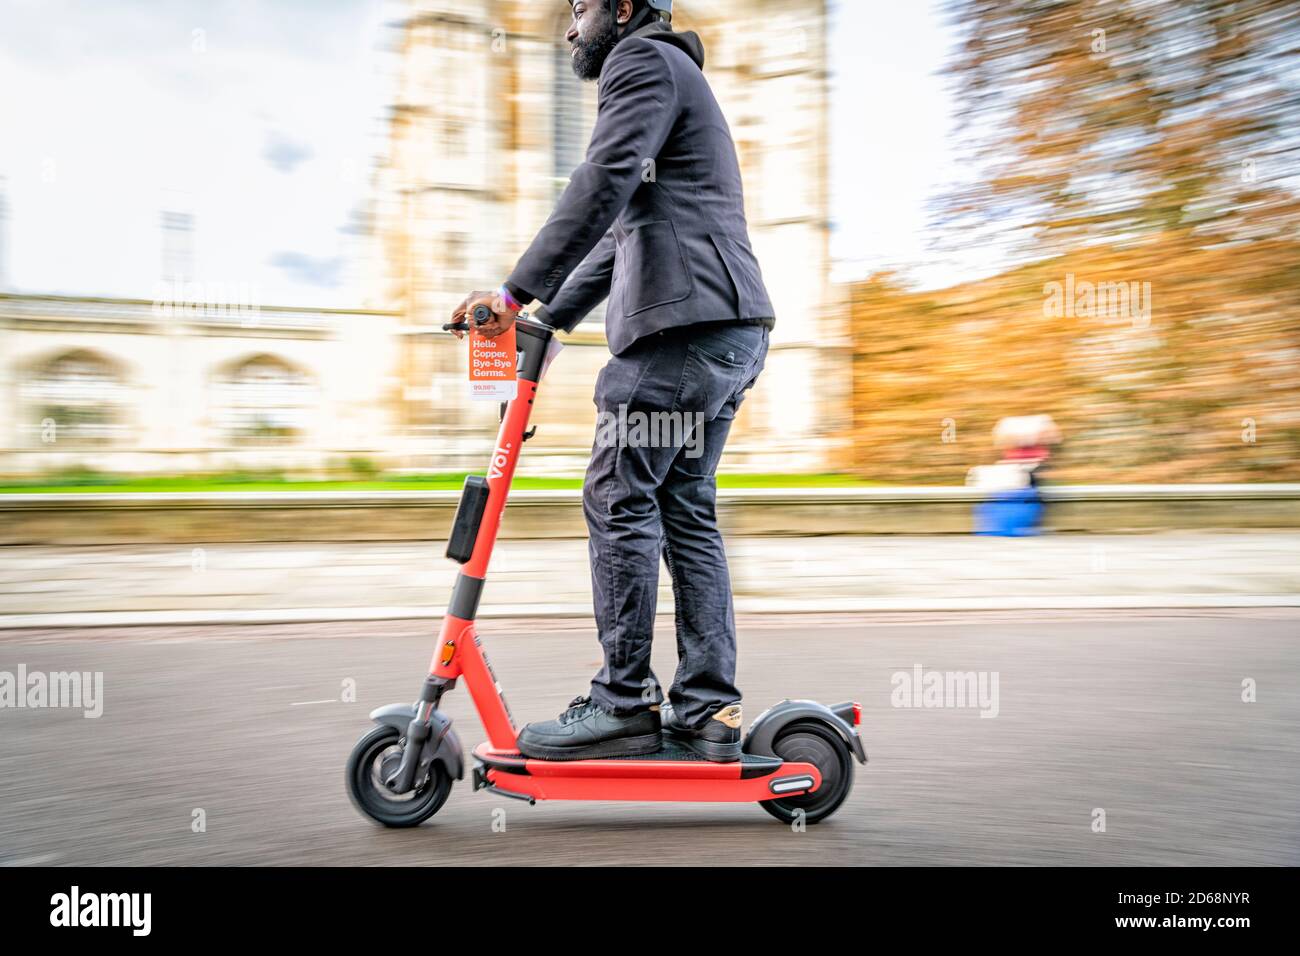 Cambridge, UK. 15th Oct, 2020. Voi shared electric scooters launch a trial  in Cambridge City UK. Cambridge is already well known for its wide use of  bicycles and now hire scooters will